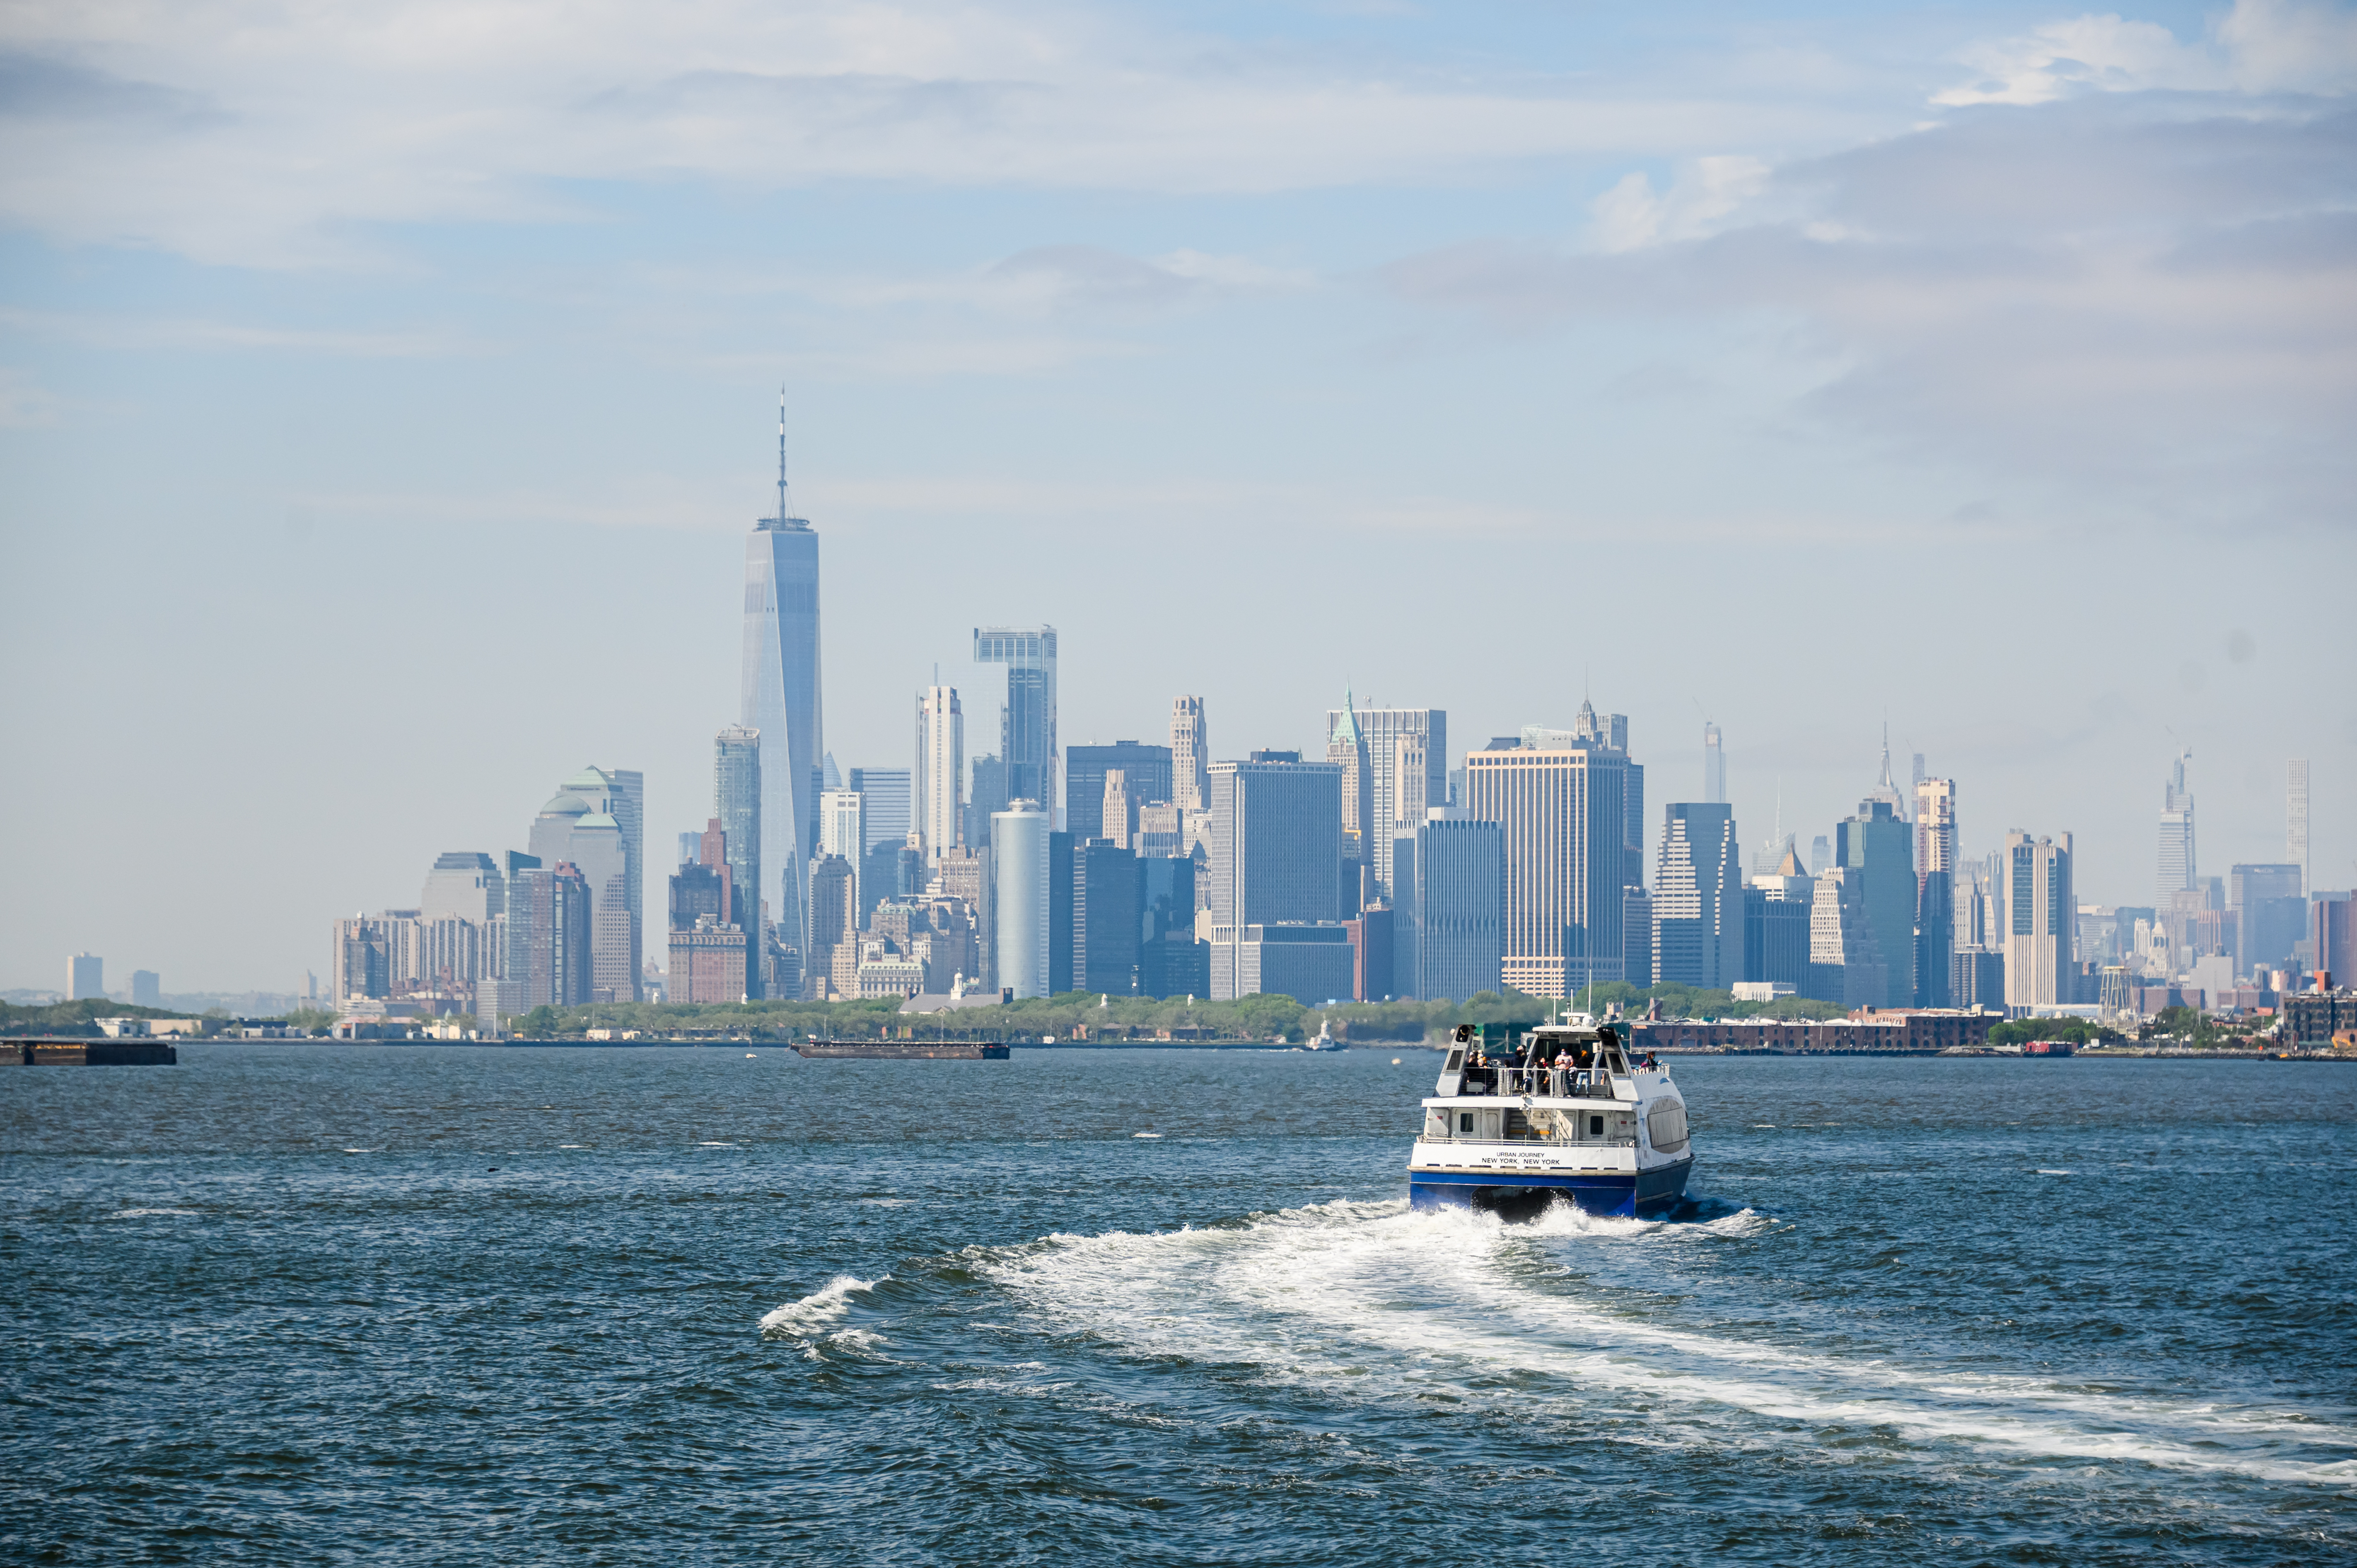 A view of the NYC Ferry by Hornblower.